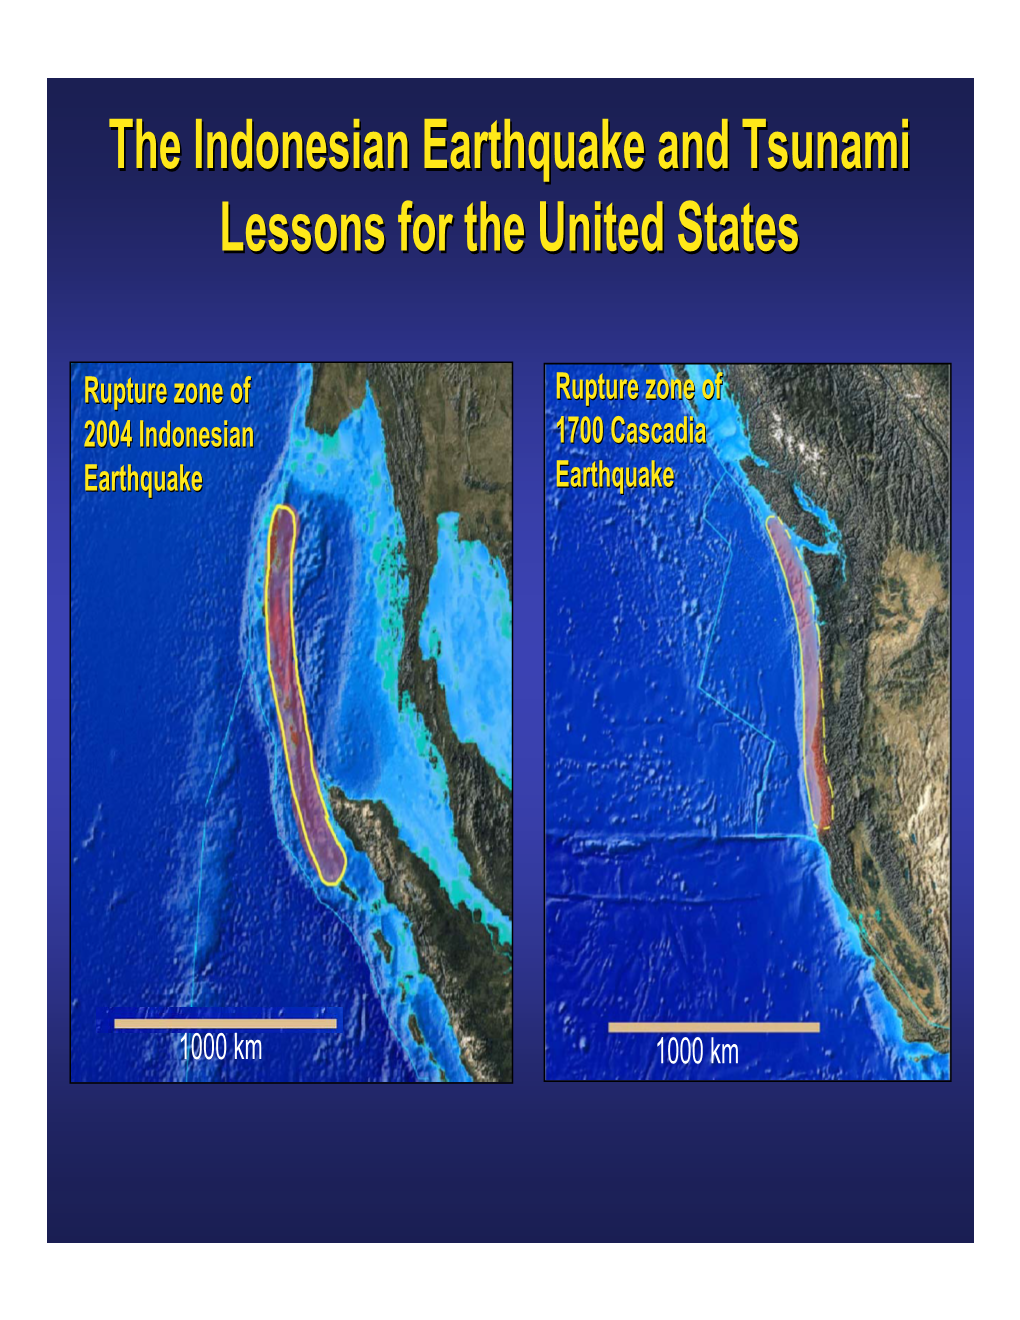 The Indonesian Earthquake and Tsunami Lessons for the United